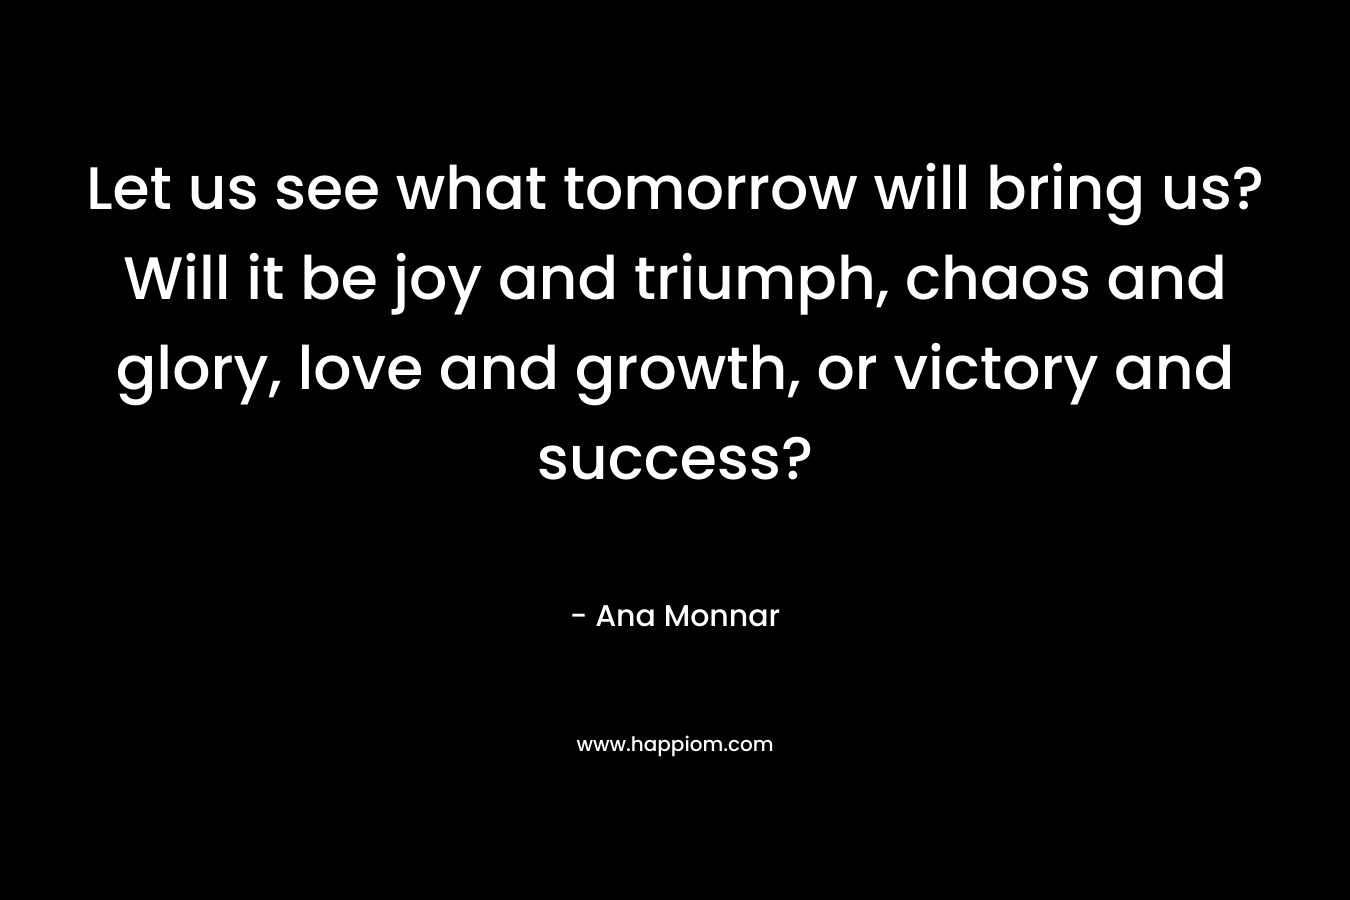 Let us see what tomorrow will bring us? Will it be joy and triumph, chaos and glory, love and growth, or victory and success?